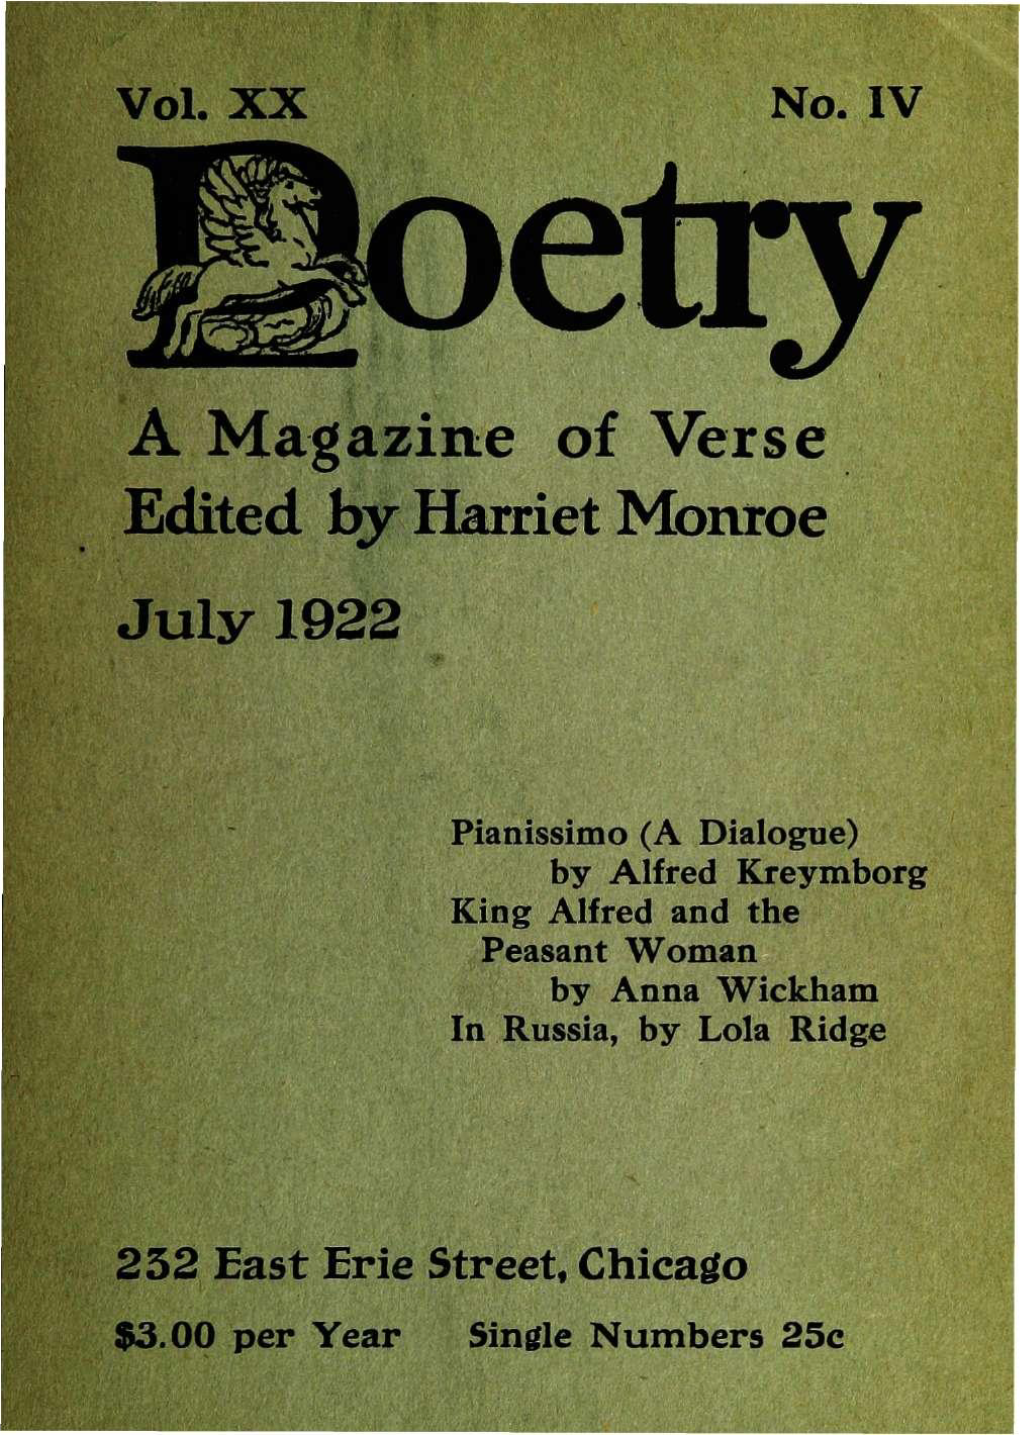 A Magazine of Verse Edited by Harriet Monroe July 1922